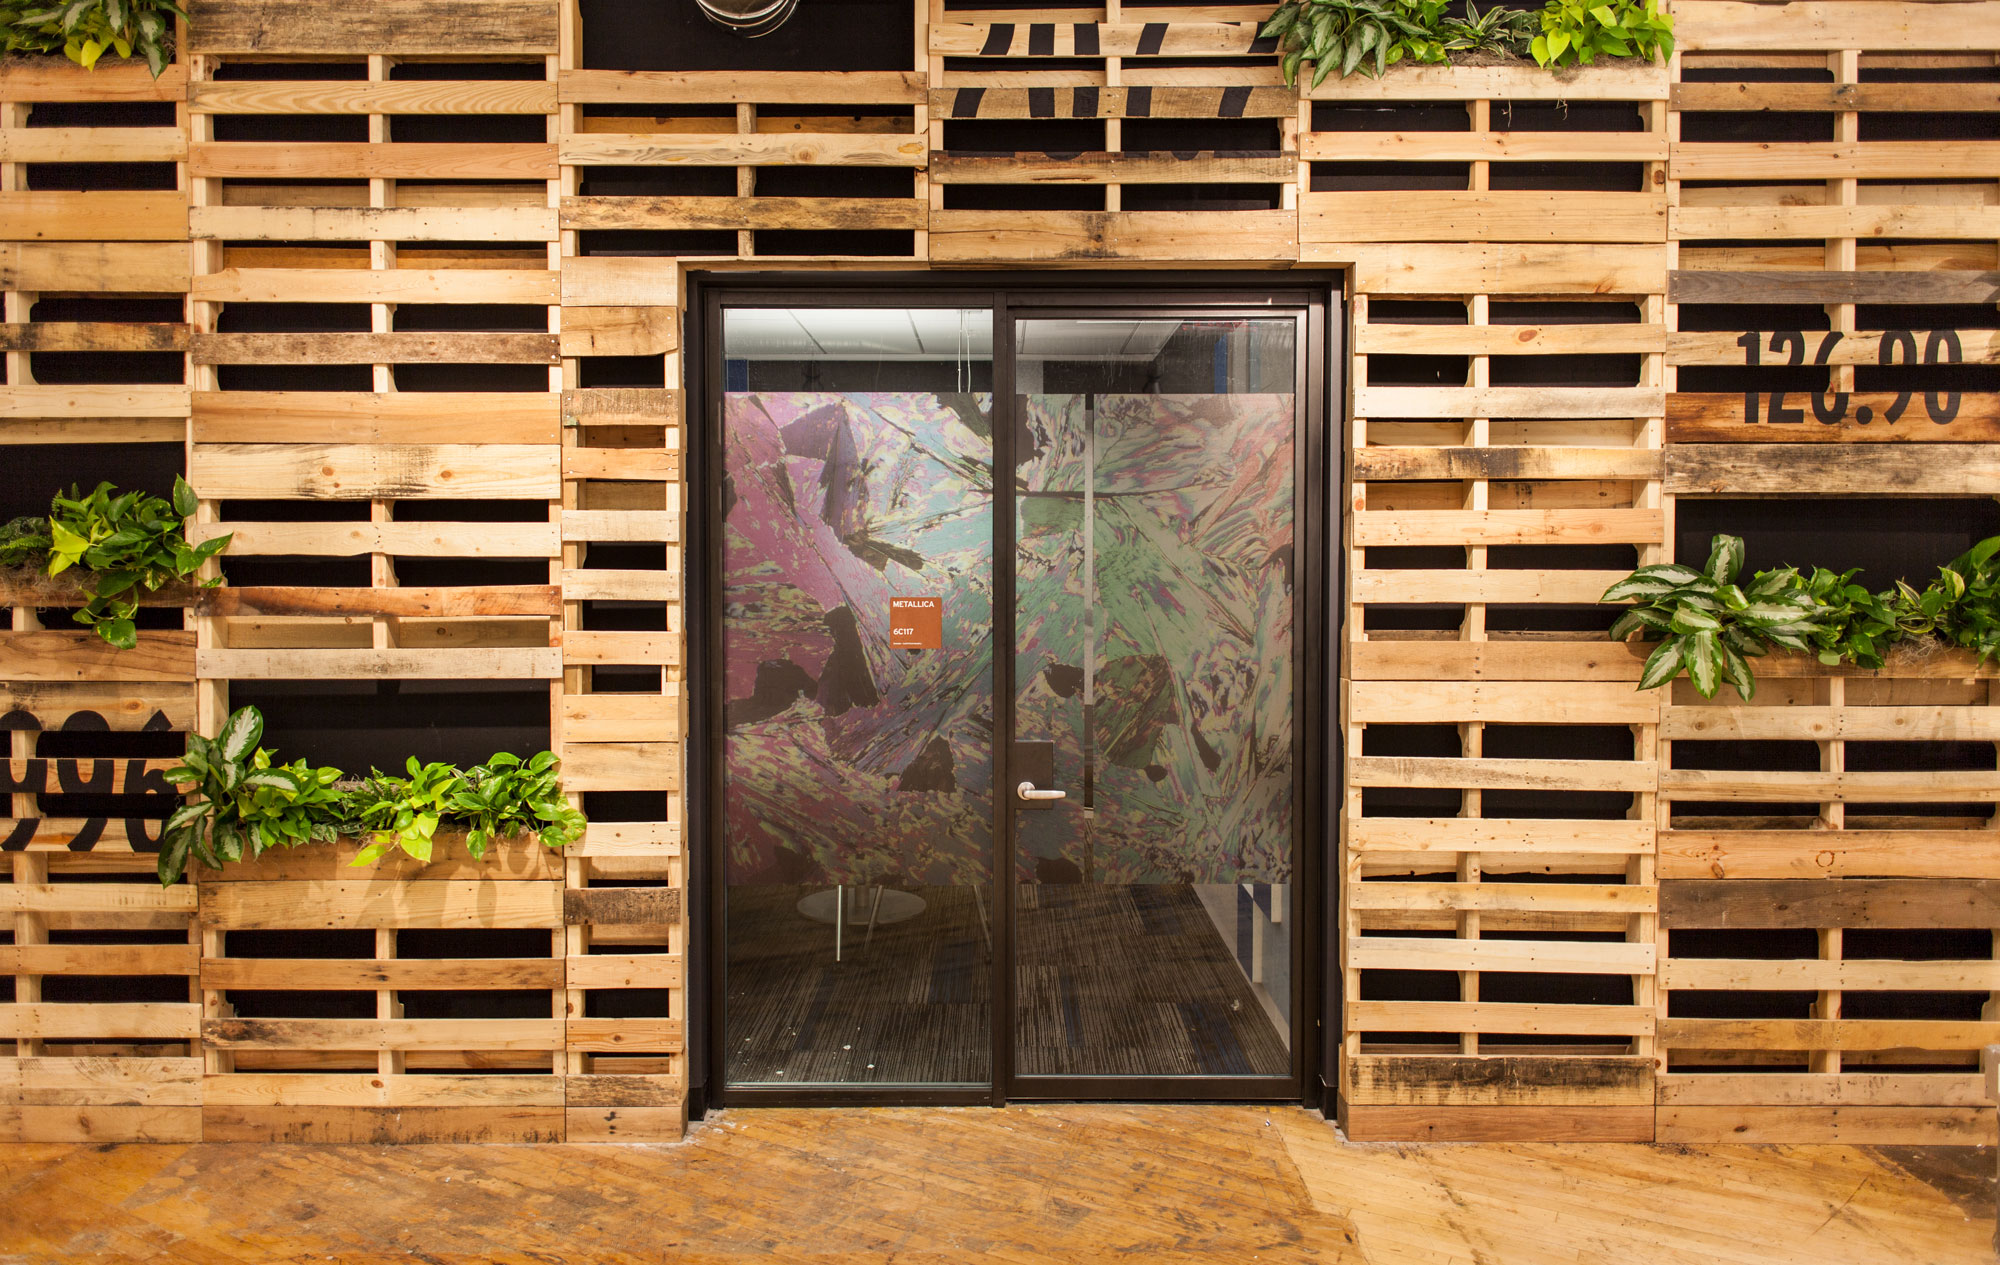 A conference room with vinyl graphics surrounded by a wall of wood pallets for an Elemental Environment